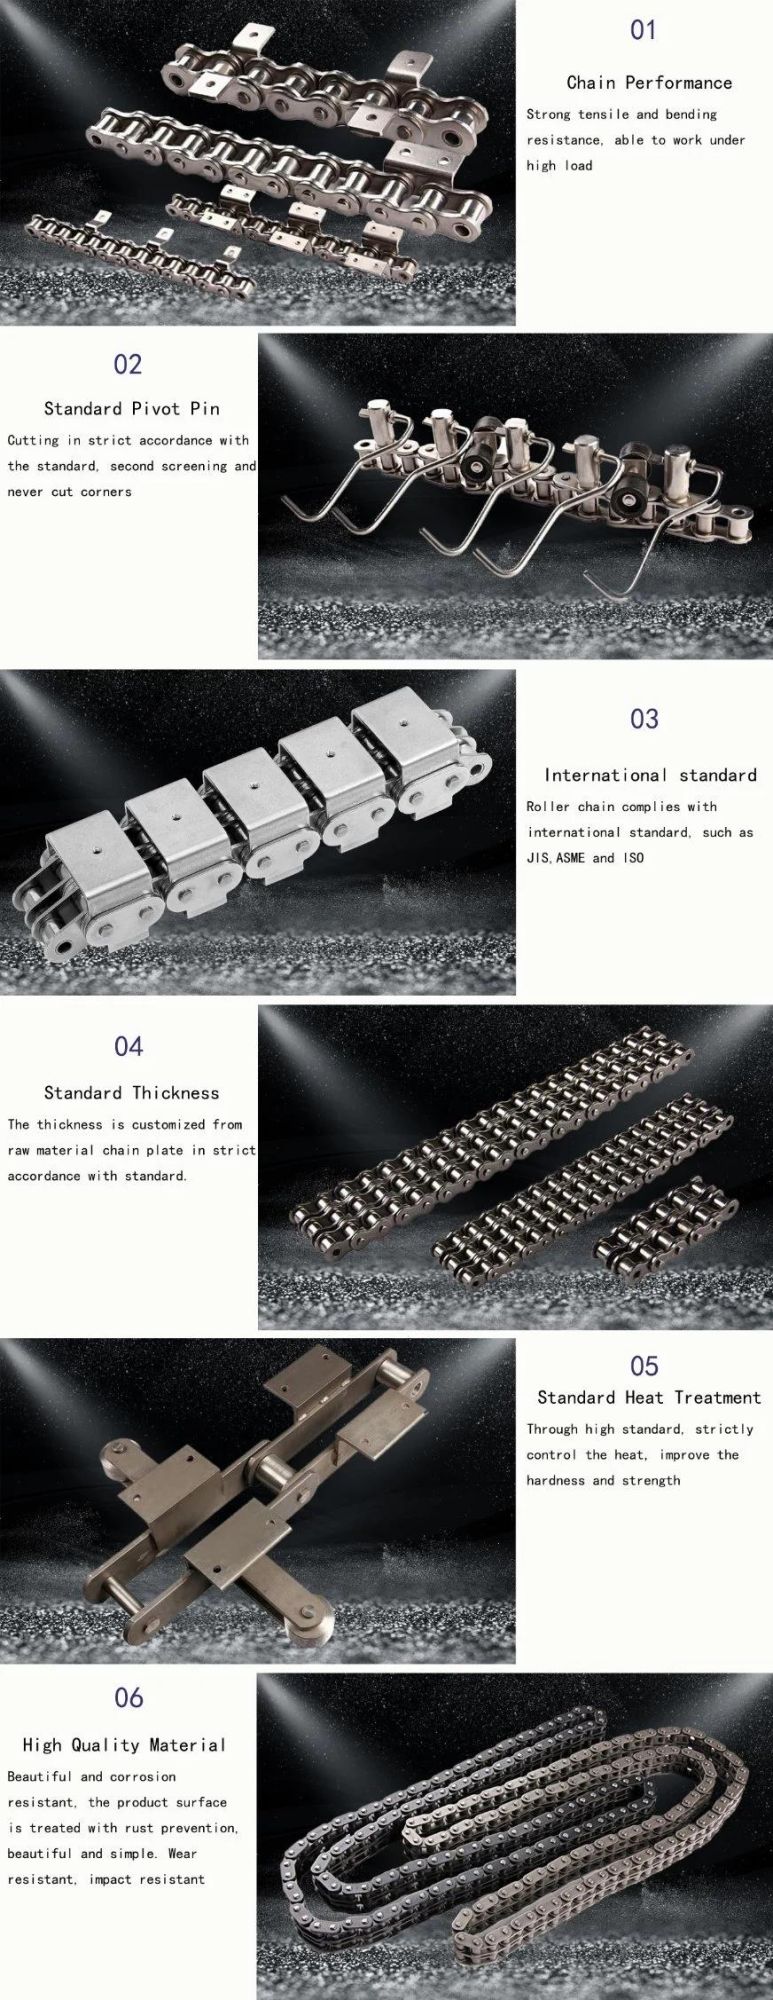 Experienced Stainless Steel Mt Series Conveyor Chain China Manufacturer